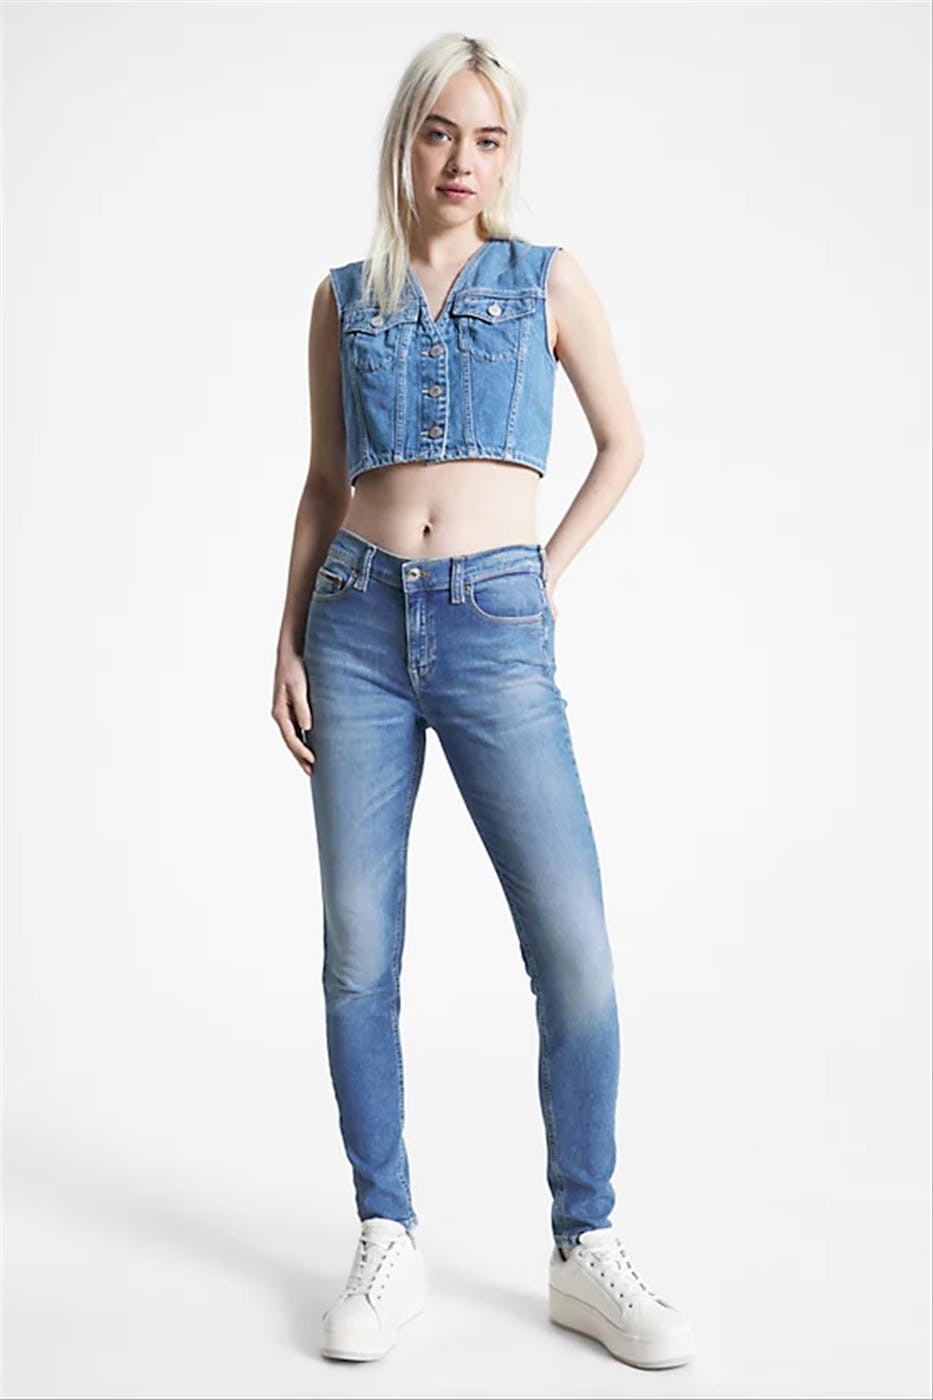 Tommy Jeans - Blauwe Nora Skinny jeans